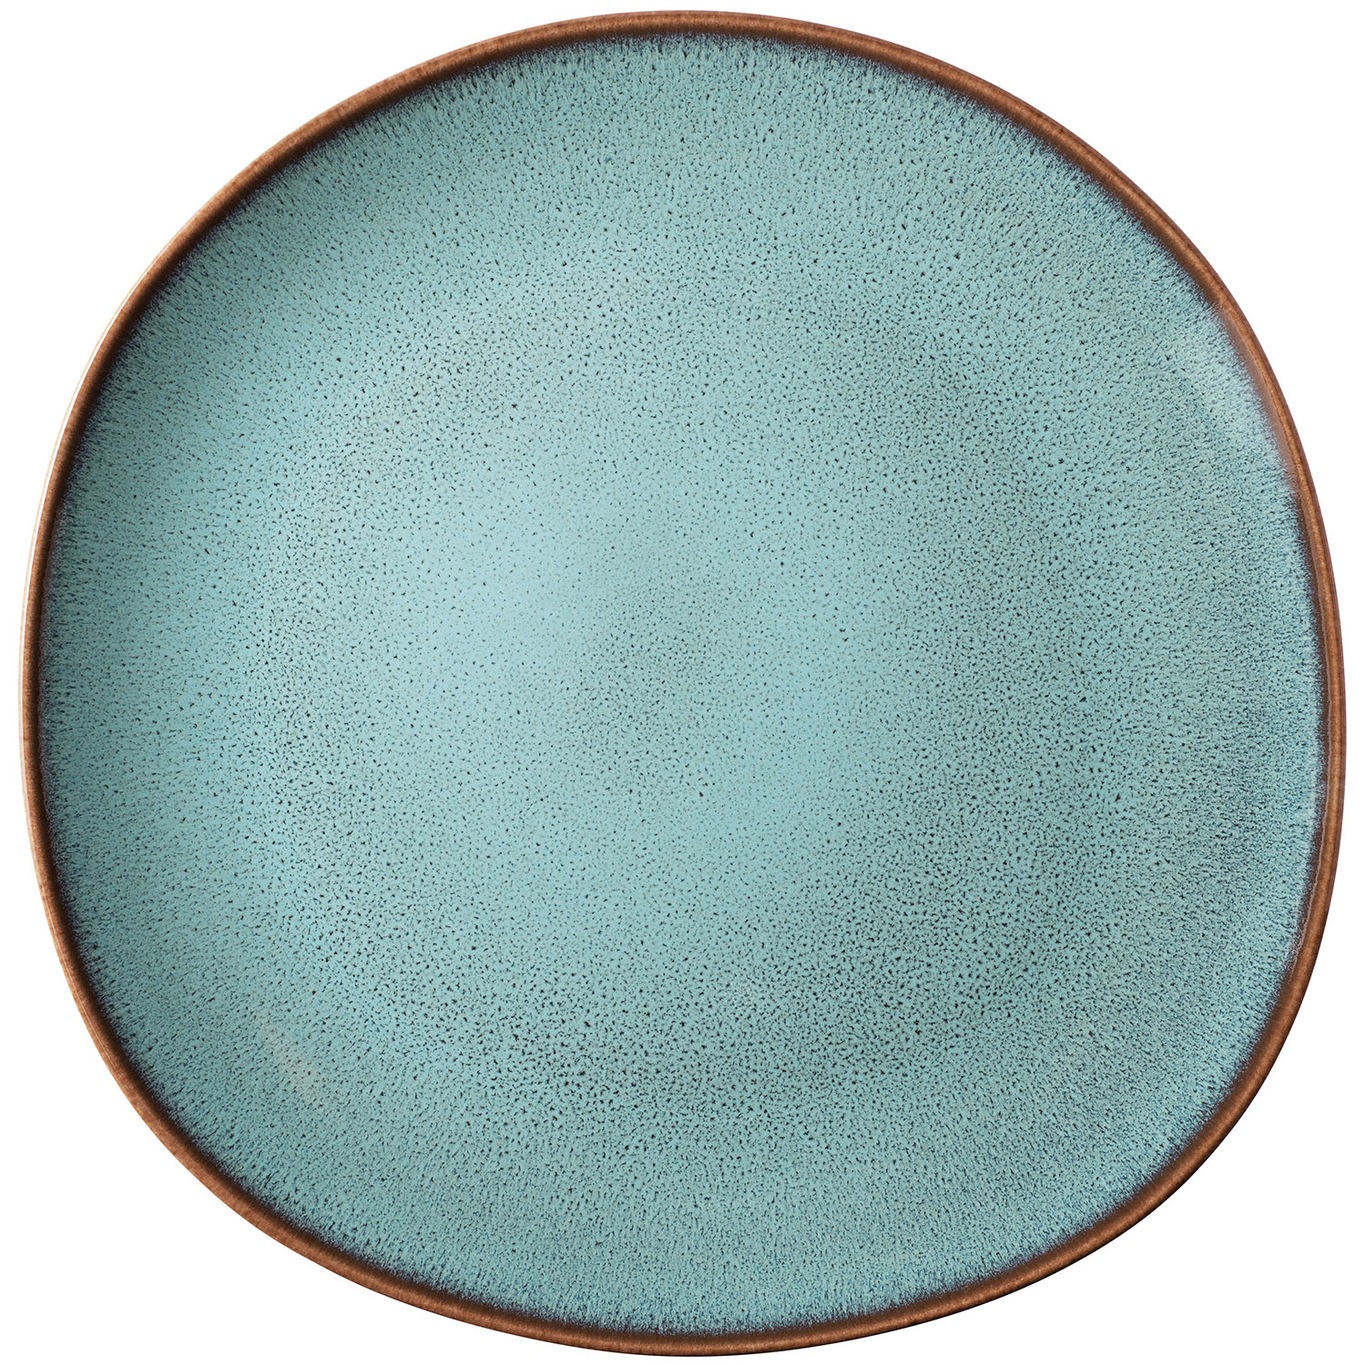 Lave Plate 28 cm, Turquoise